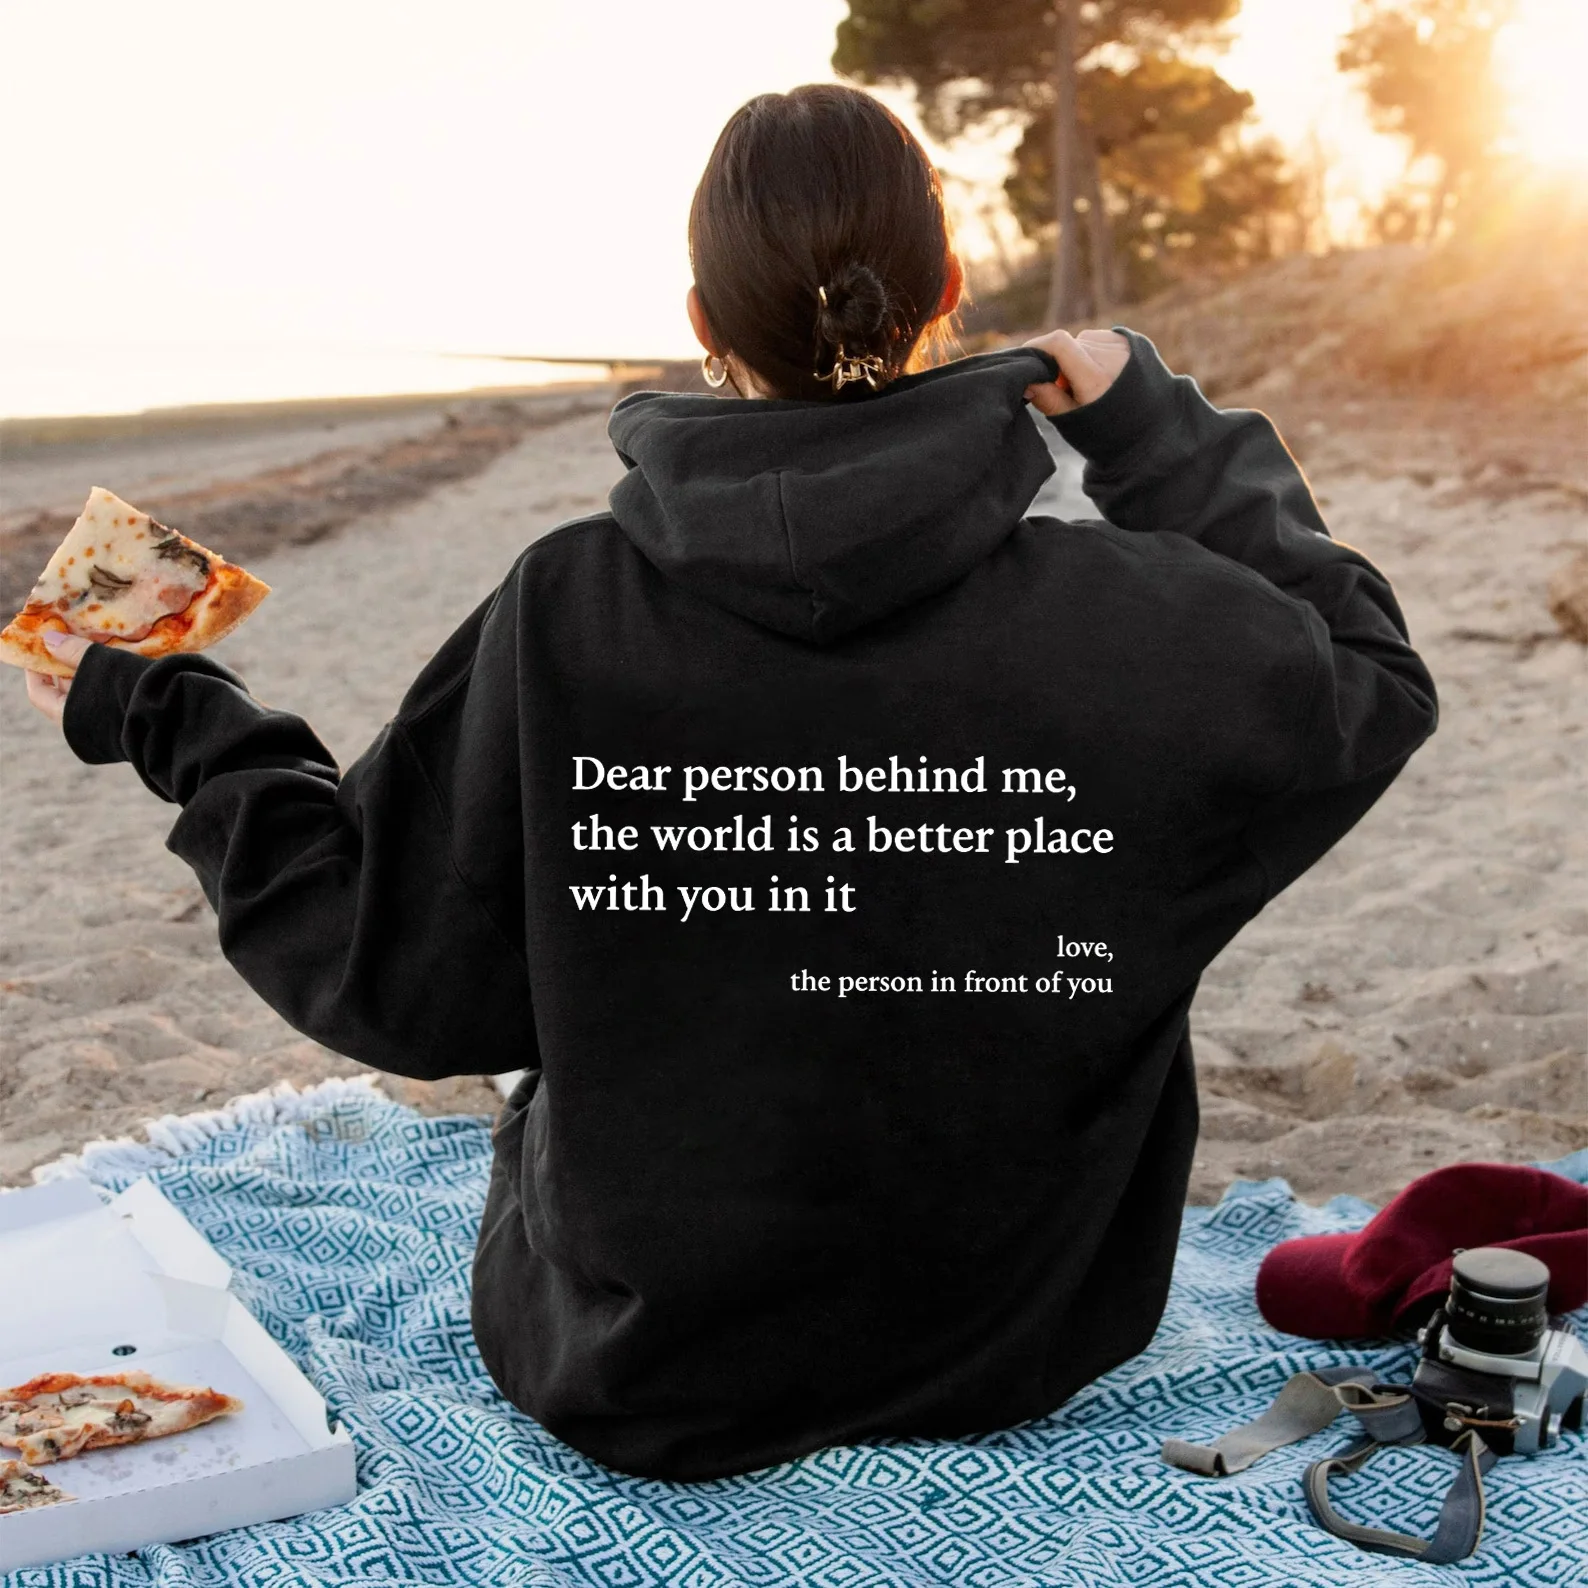 

Autumn Pullover Hooded Women Young Lady Printed Letter Dear Person Behind Me Hoodie Oversize Aesthetic Hoody Sweatshirt Tops